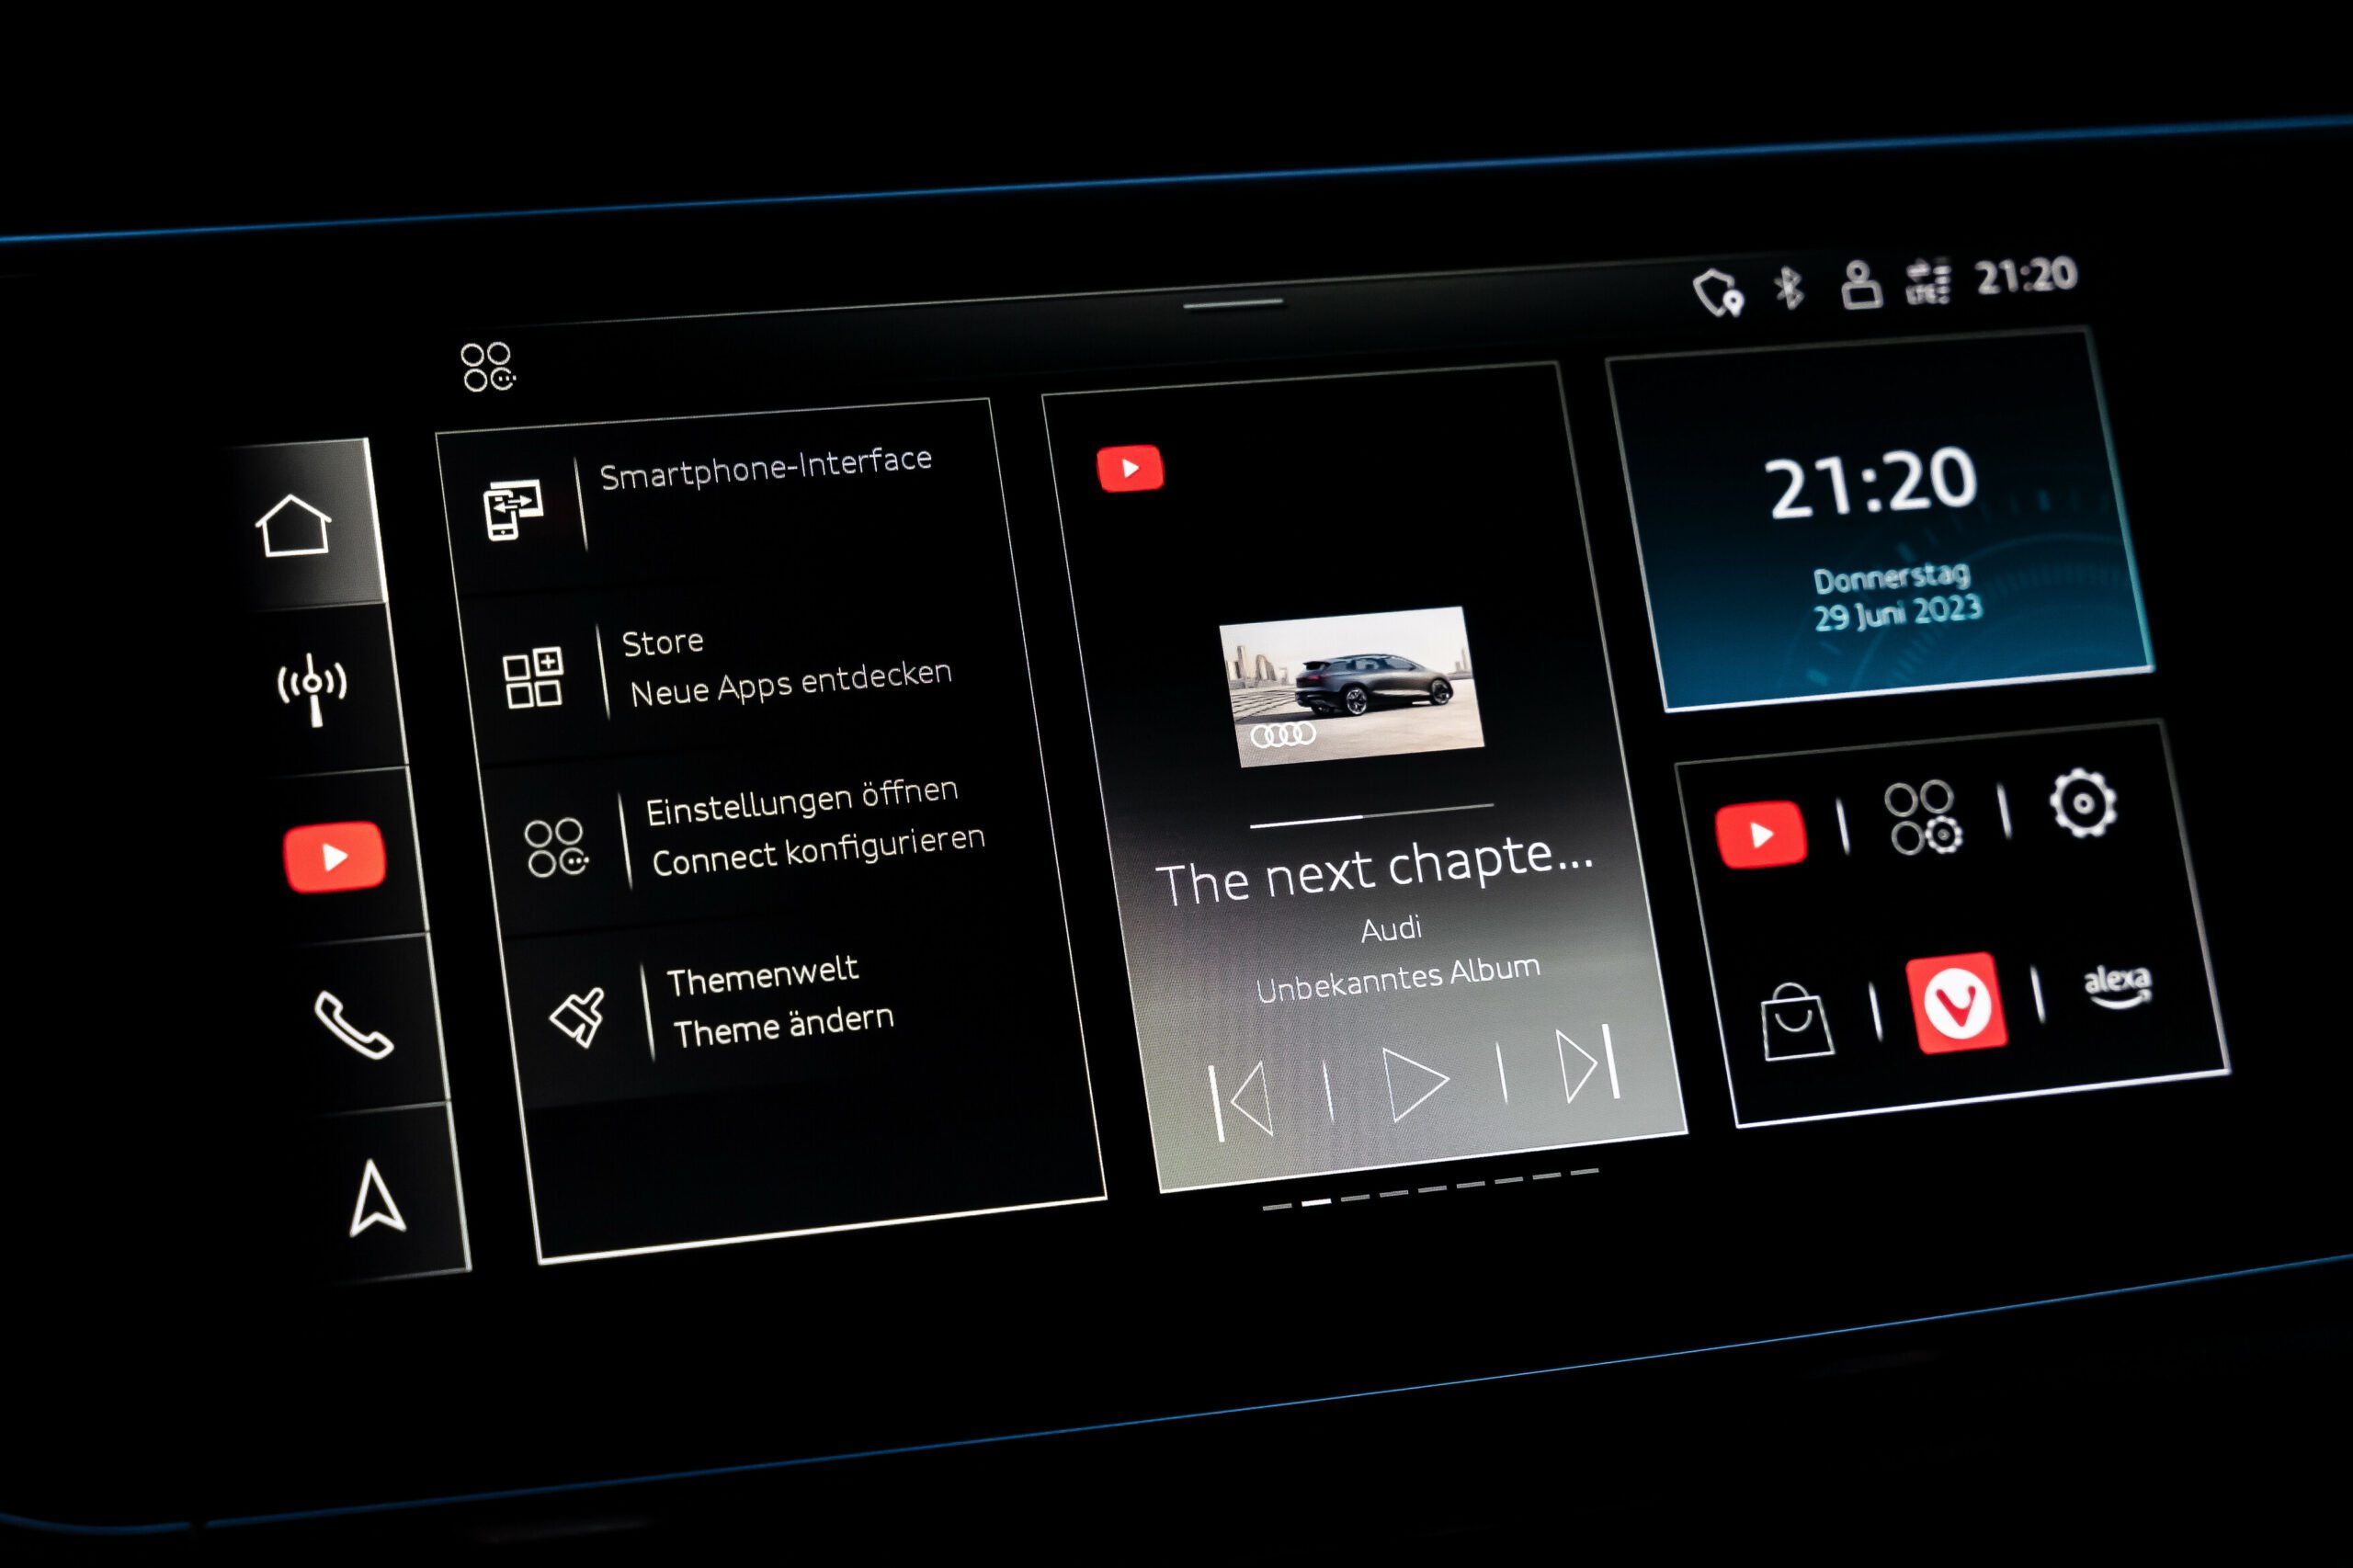 A promo shot of the new Audi MMI infotainment interface